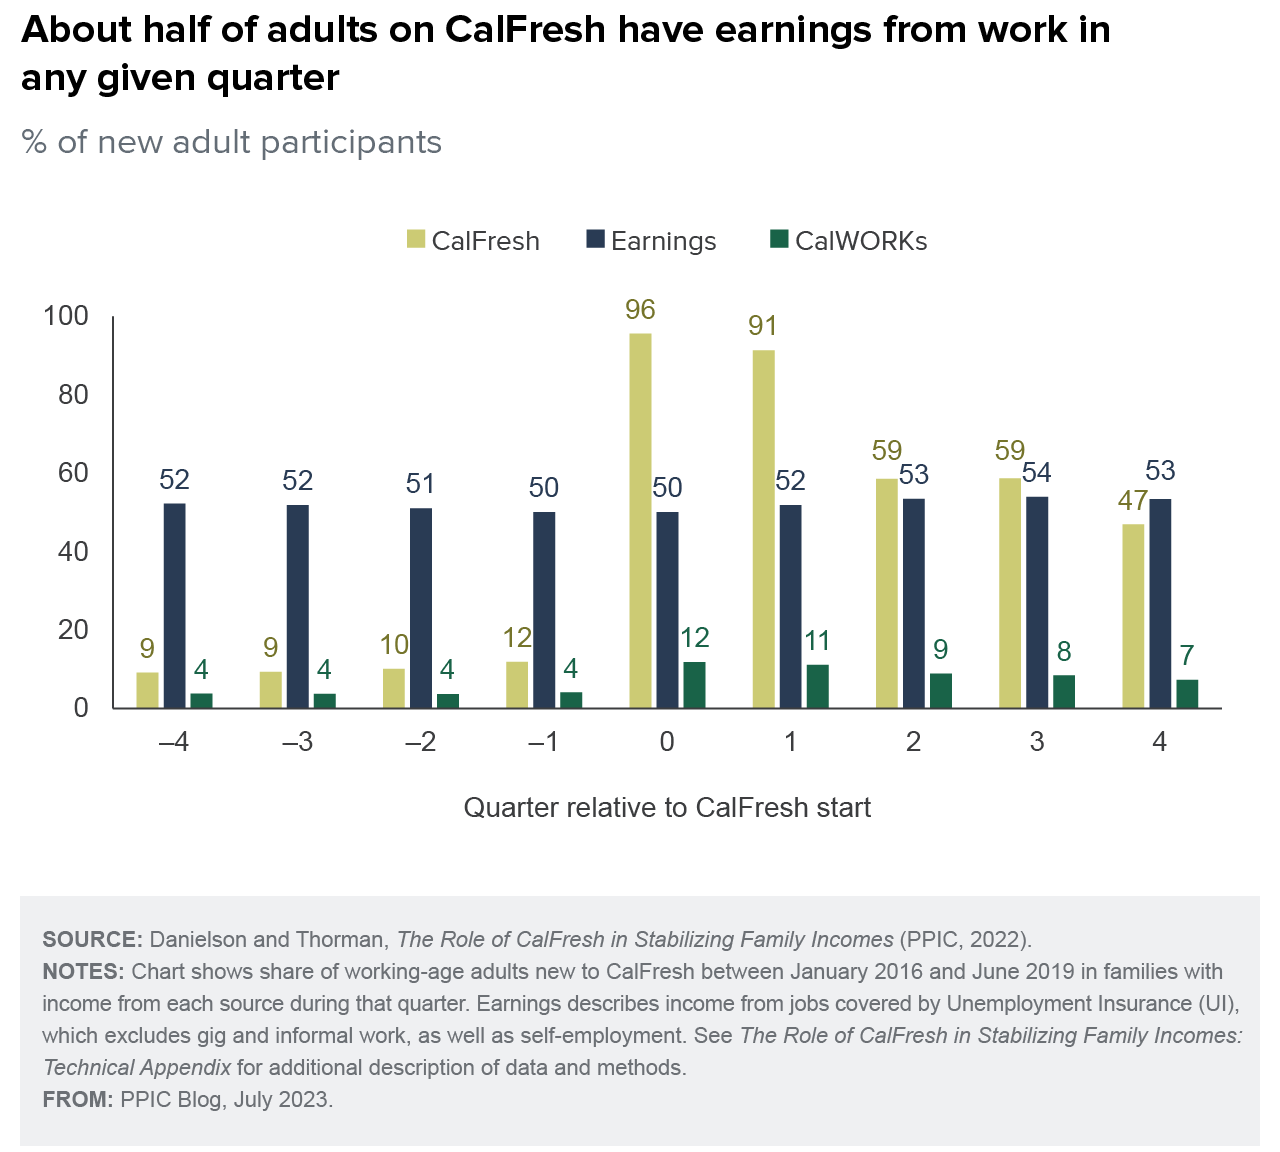 figure - About half of adults on CalFresh have earnings from work in any given quarter